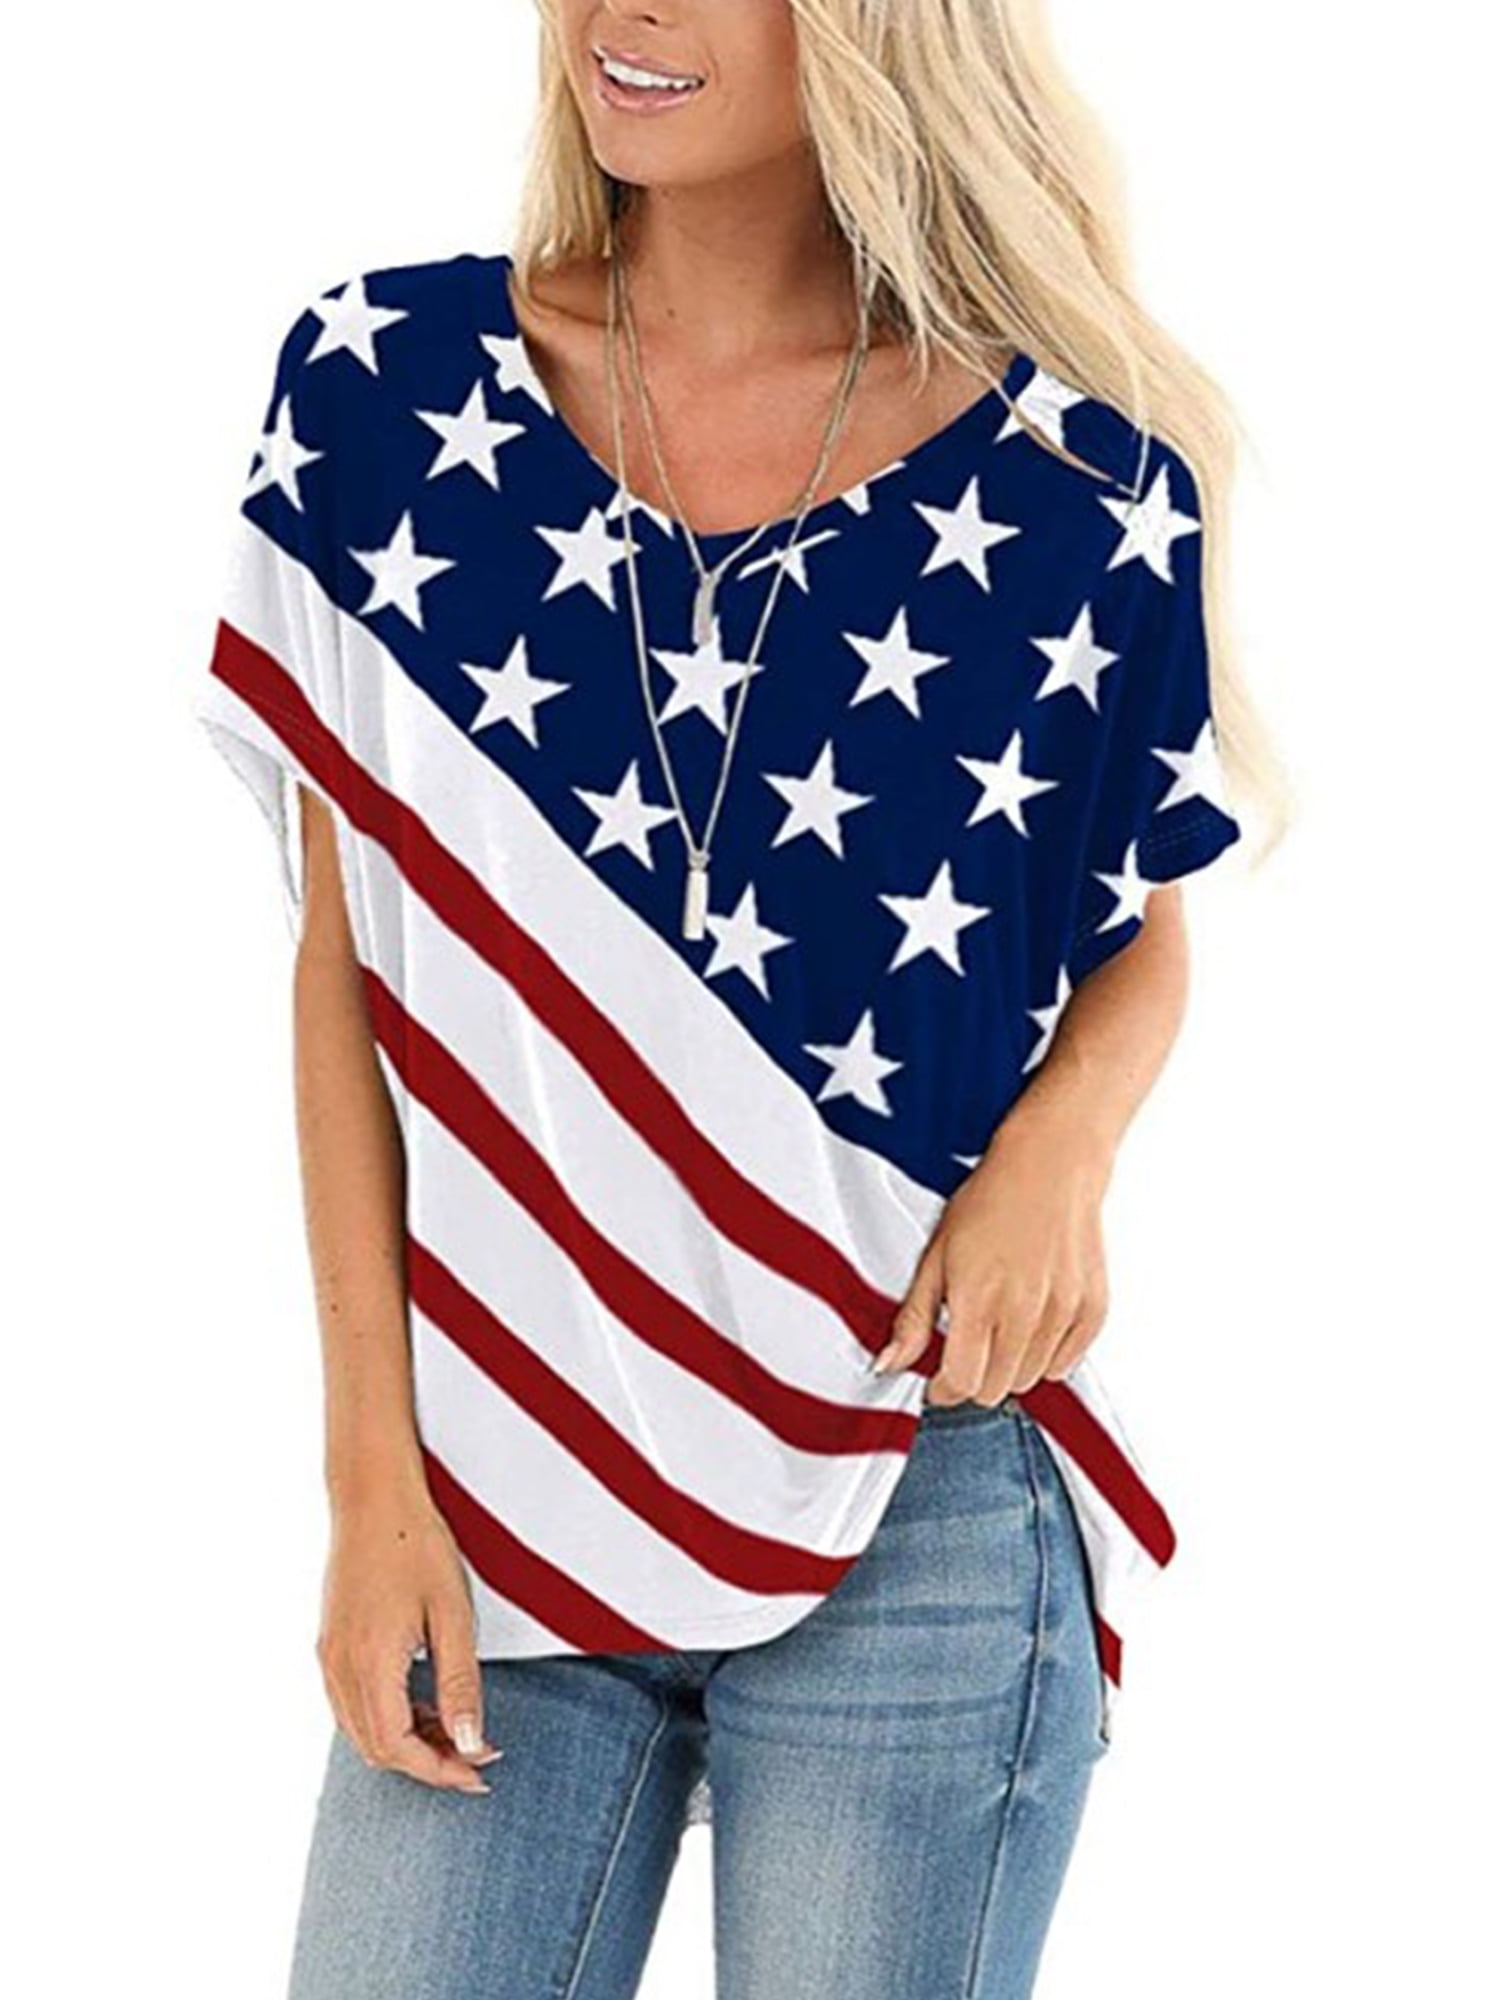 Tshirt for Women with Sayings Independence Day American Flag Tops Short Sleeve T-Shirt Top Blouse 